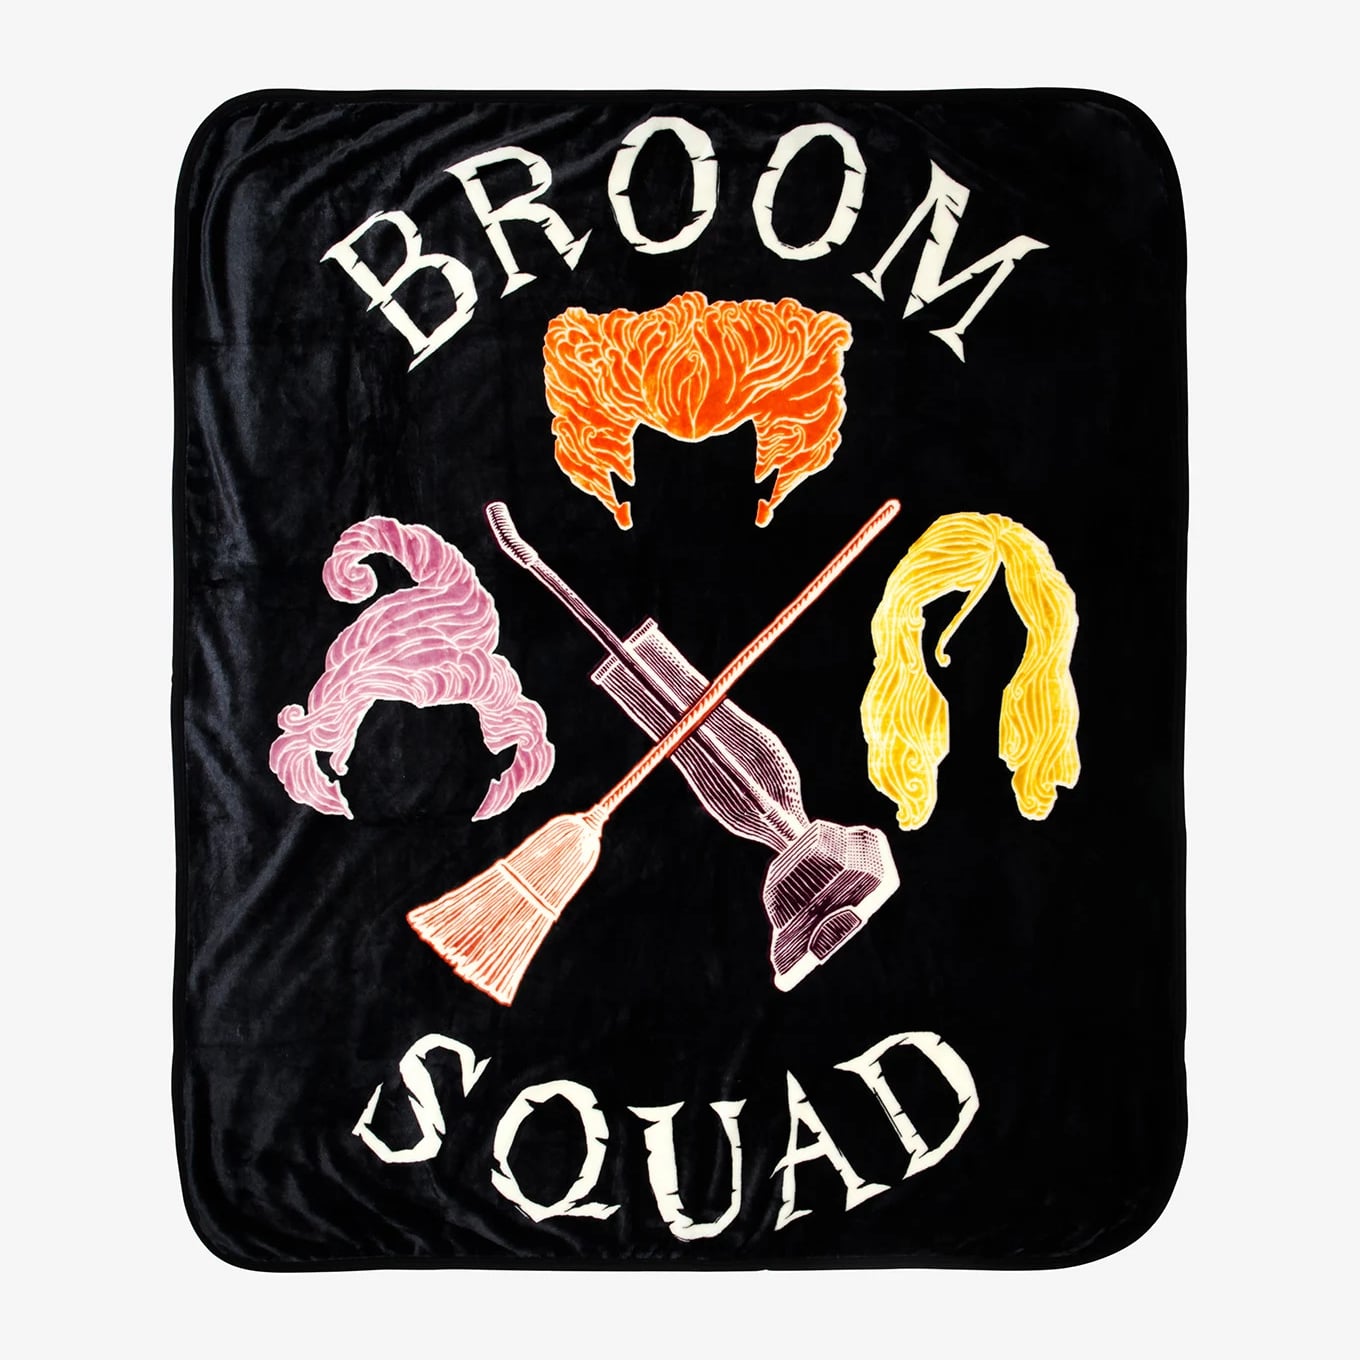 Details about   Hocus Pocus Three Witches Fleece Blanket Print In USA 